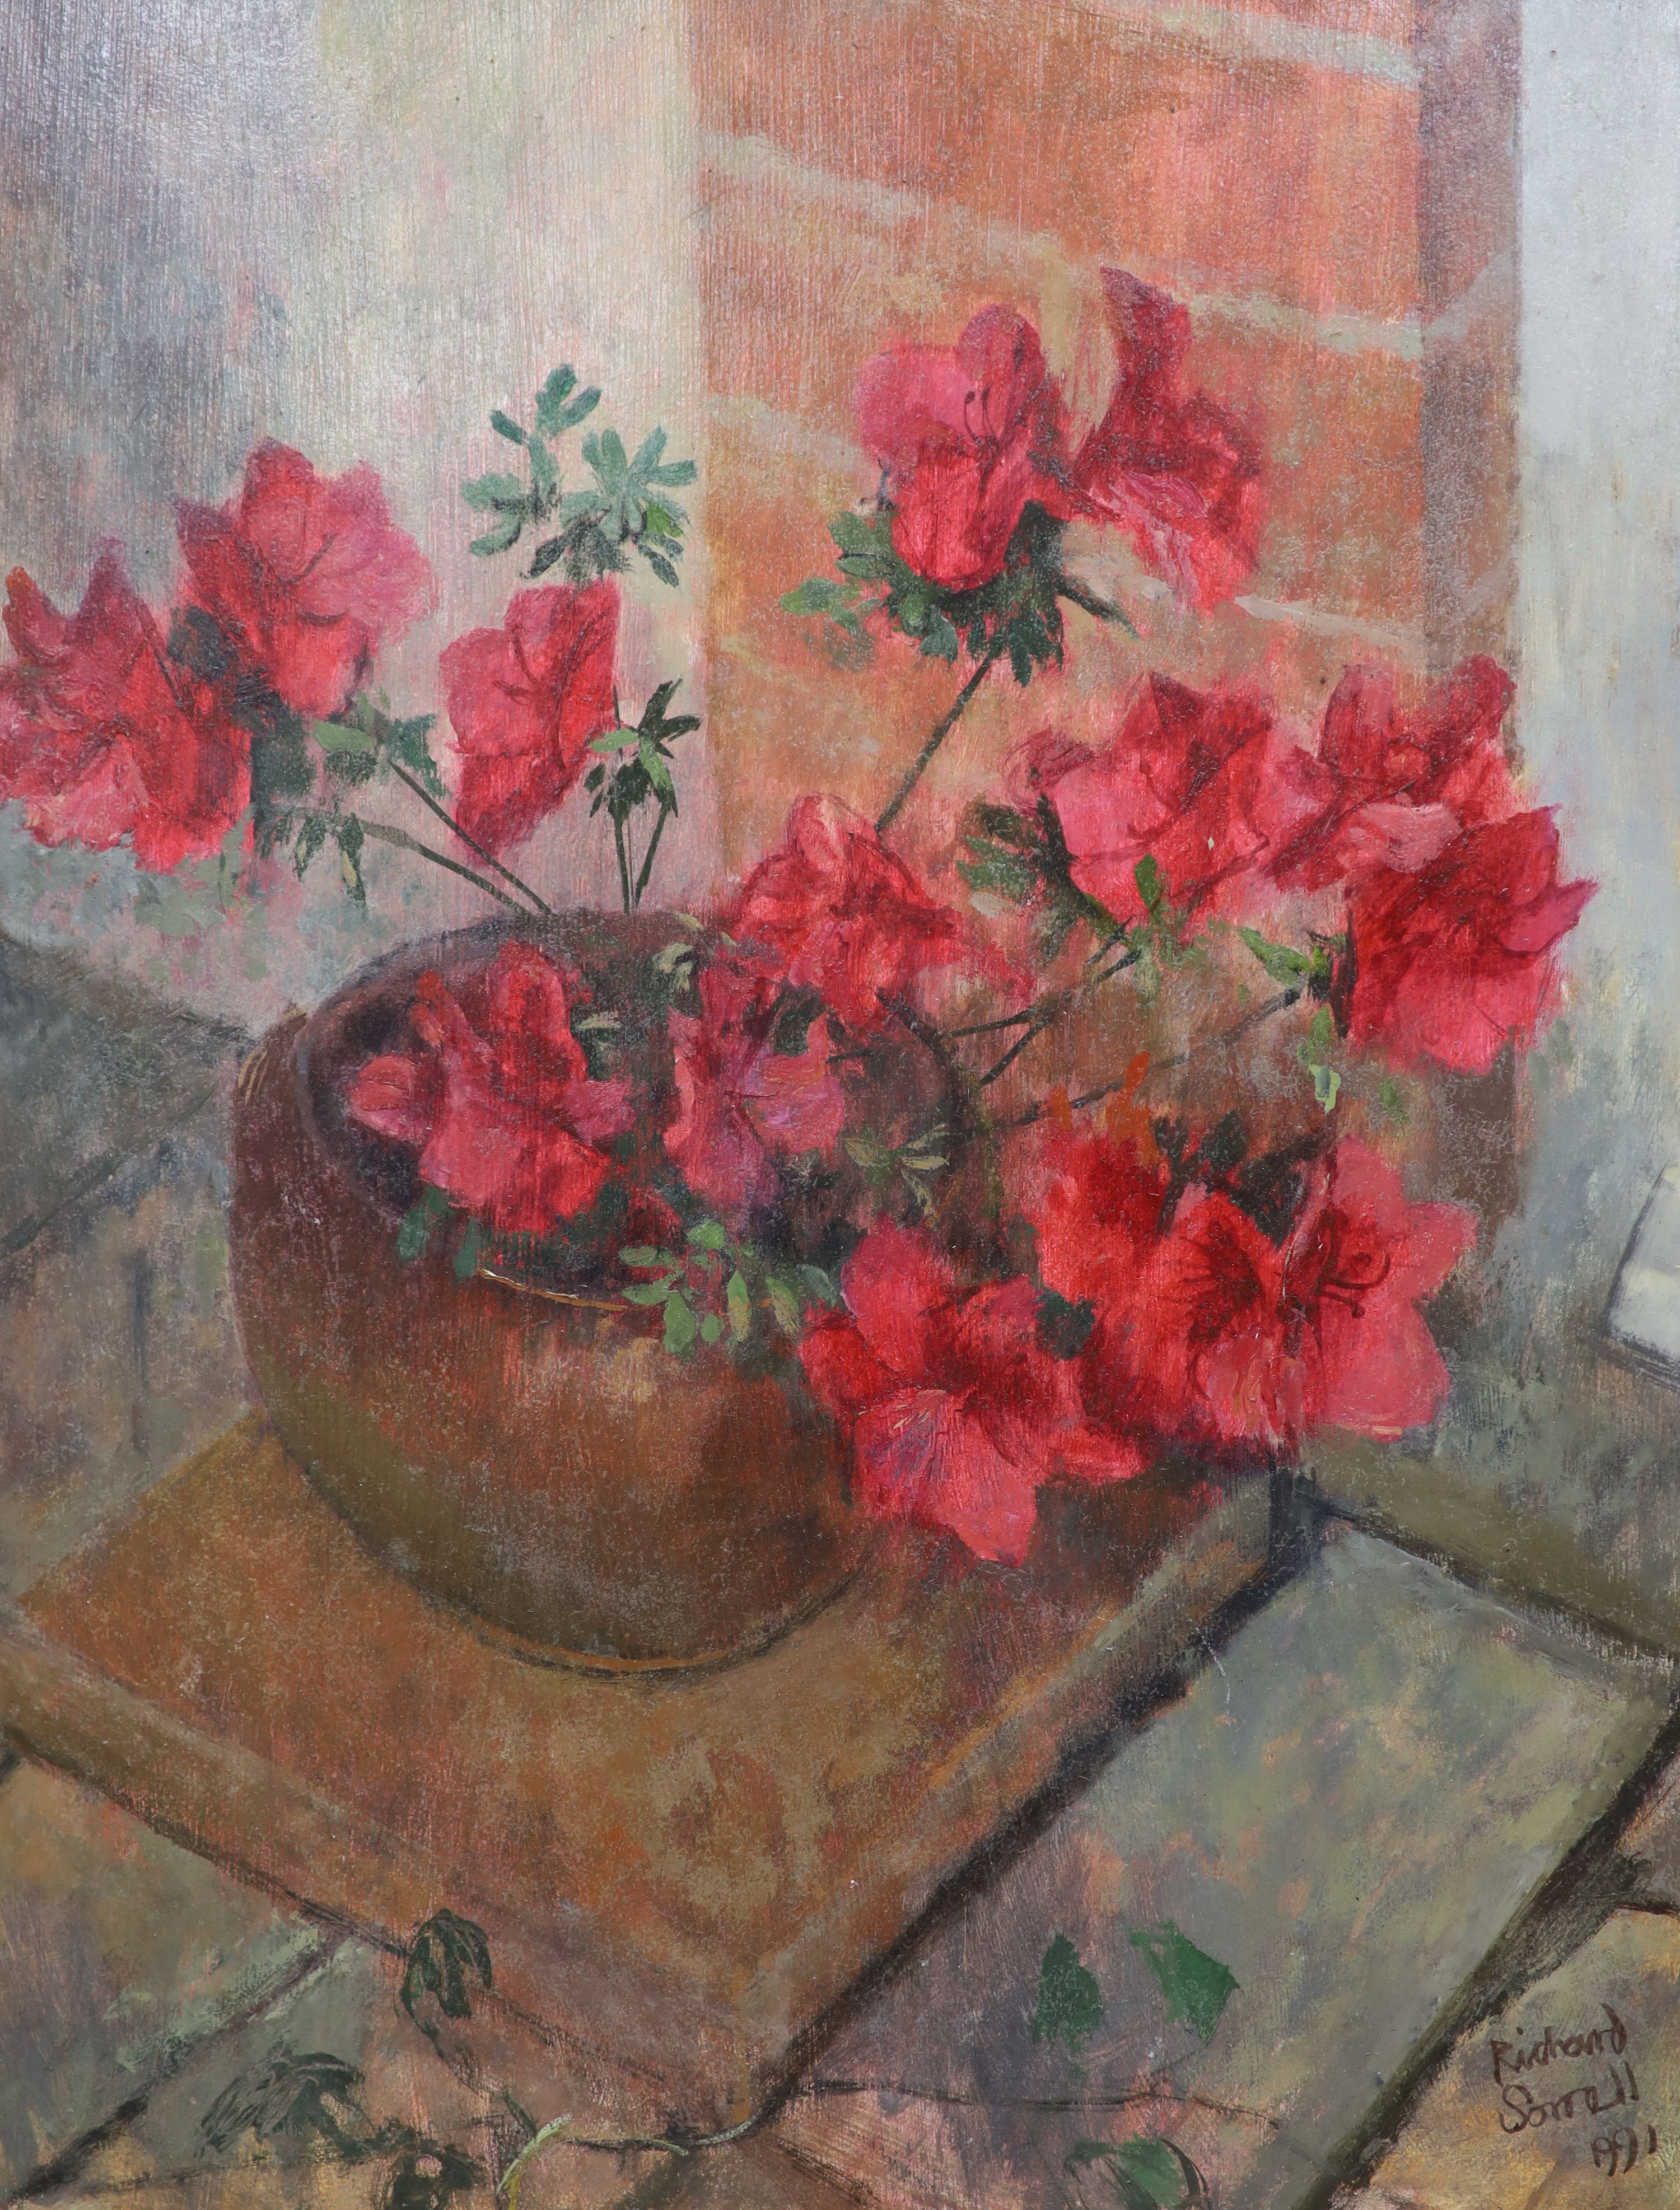 Richard Sorrell RWS, oil on board, Still life of Azaelas in a pot, signed and dated 1991, 35 x 27cm